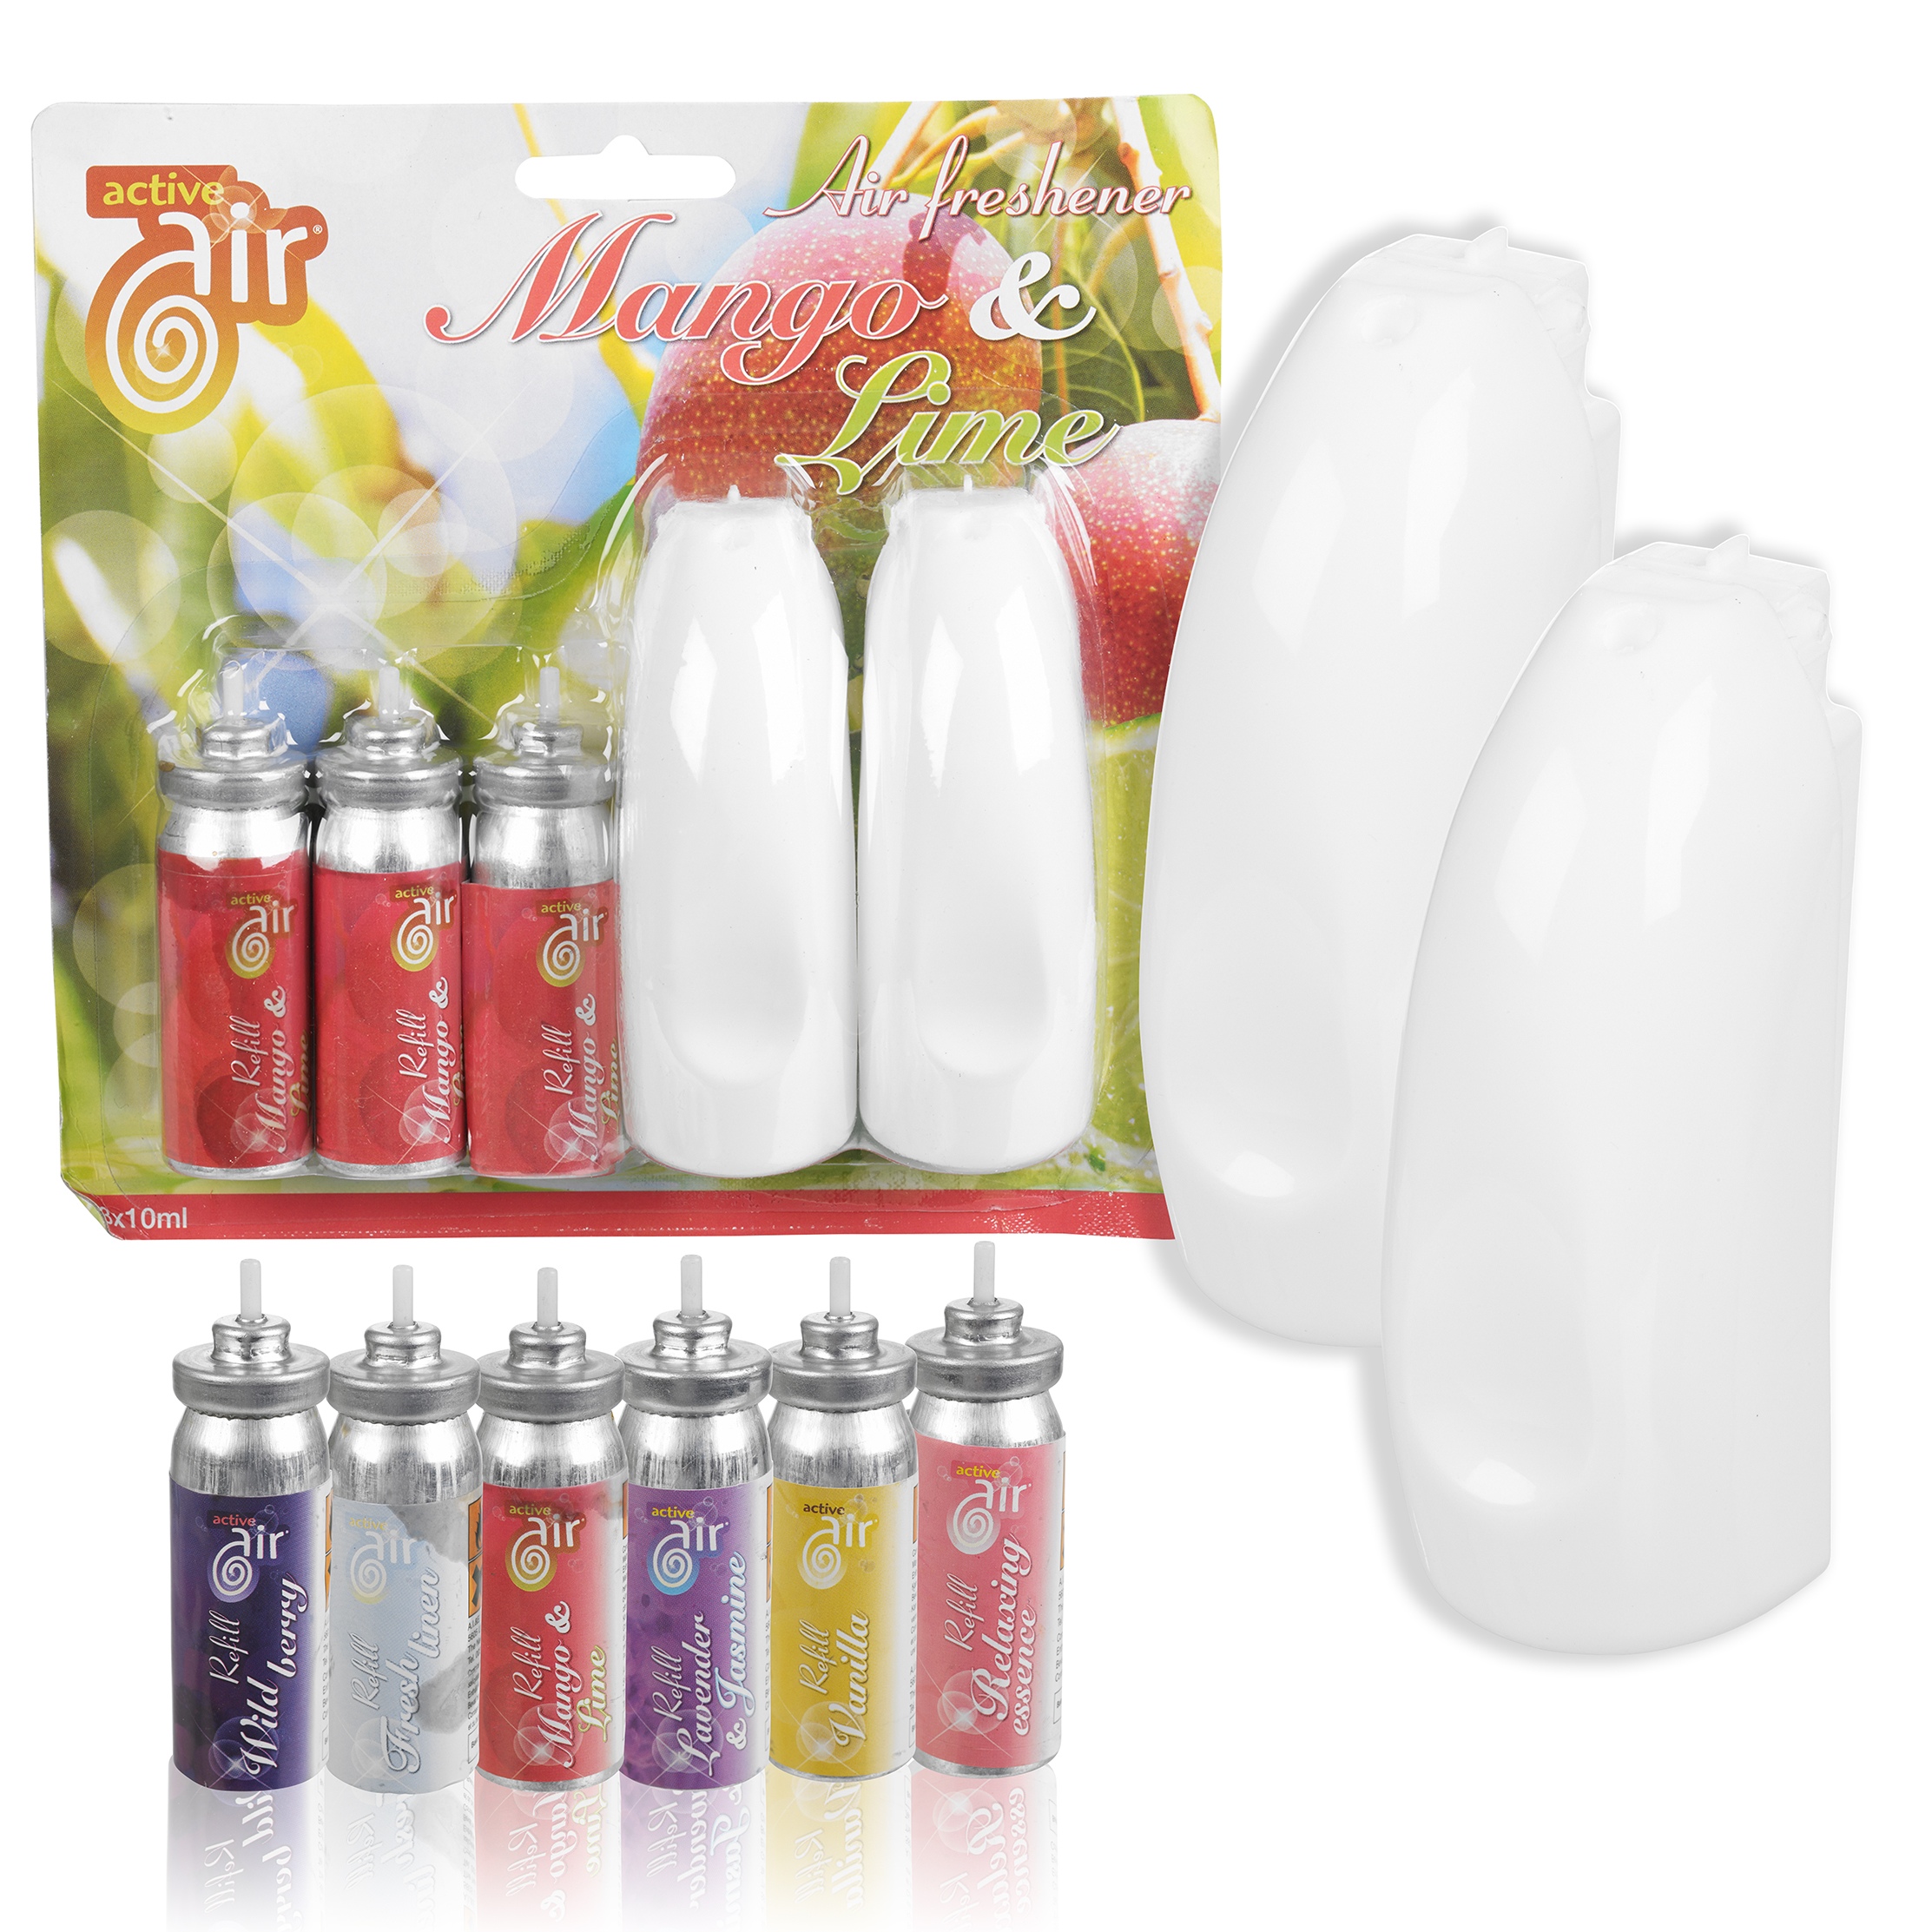 Active Air 2 x Air Freshener Spray & 3 Refills Scent Home